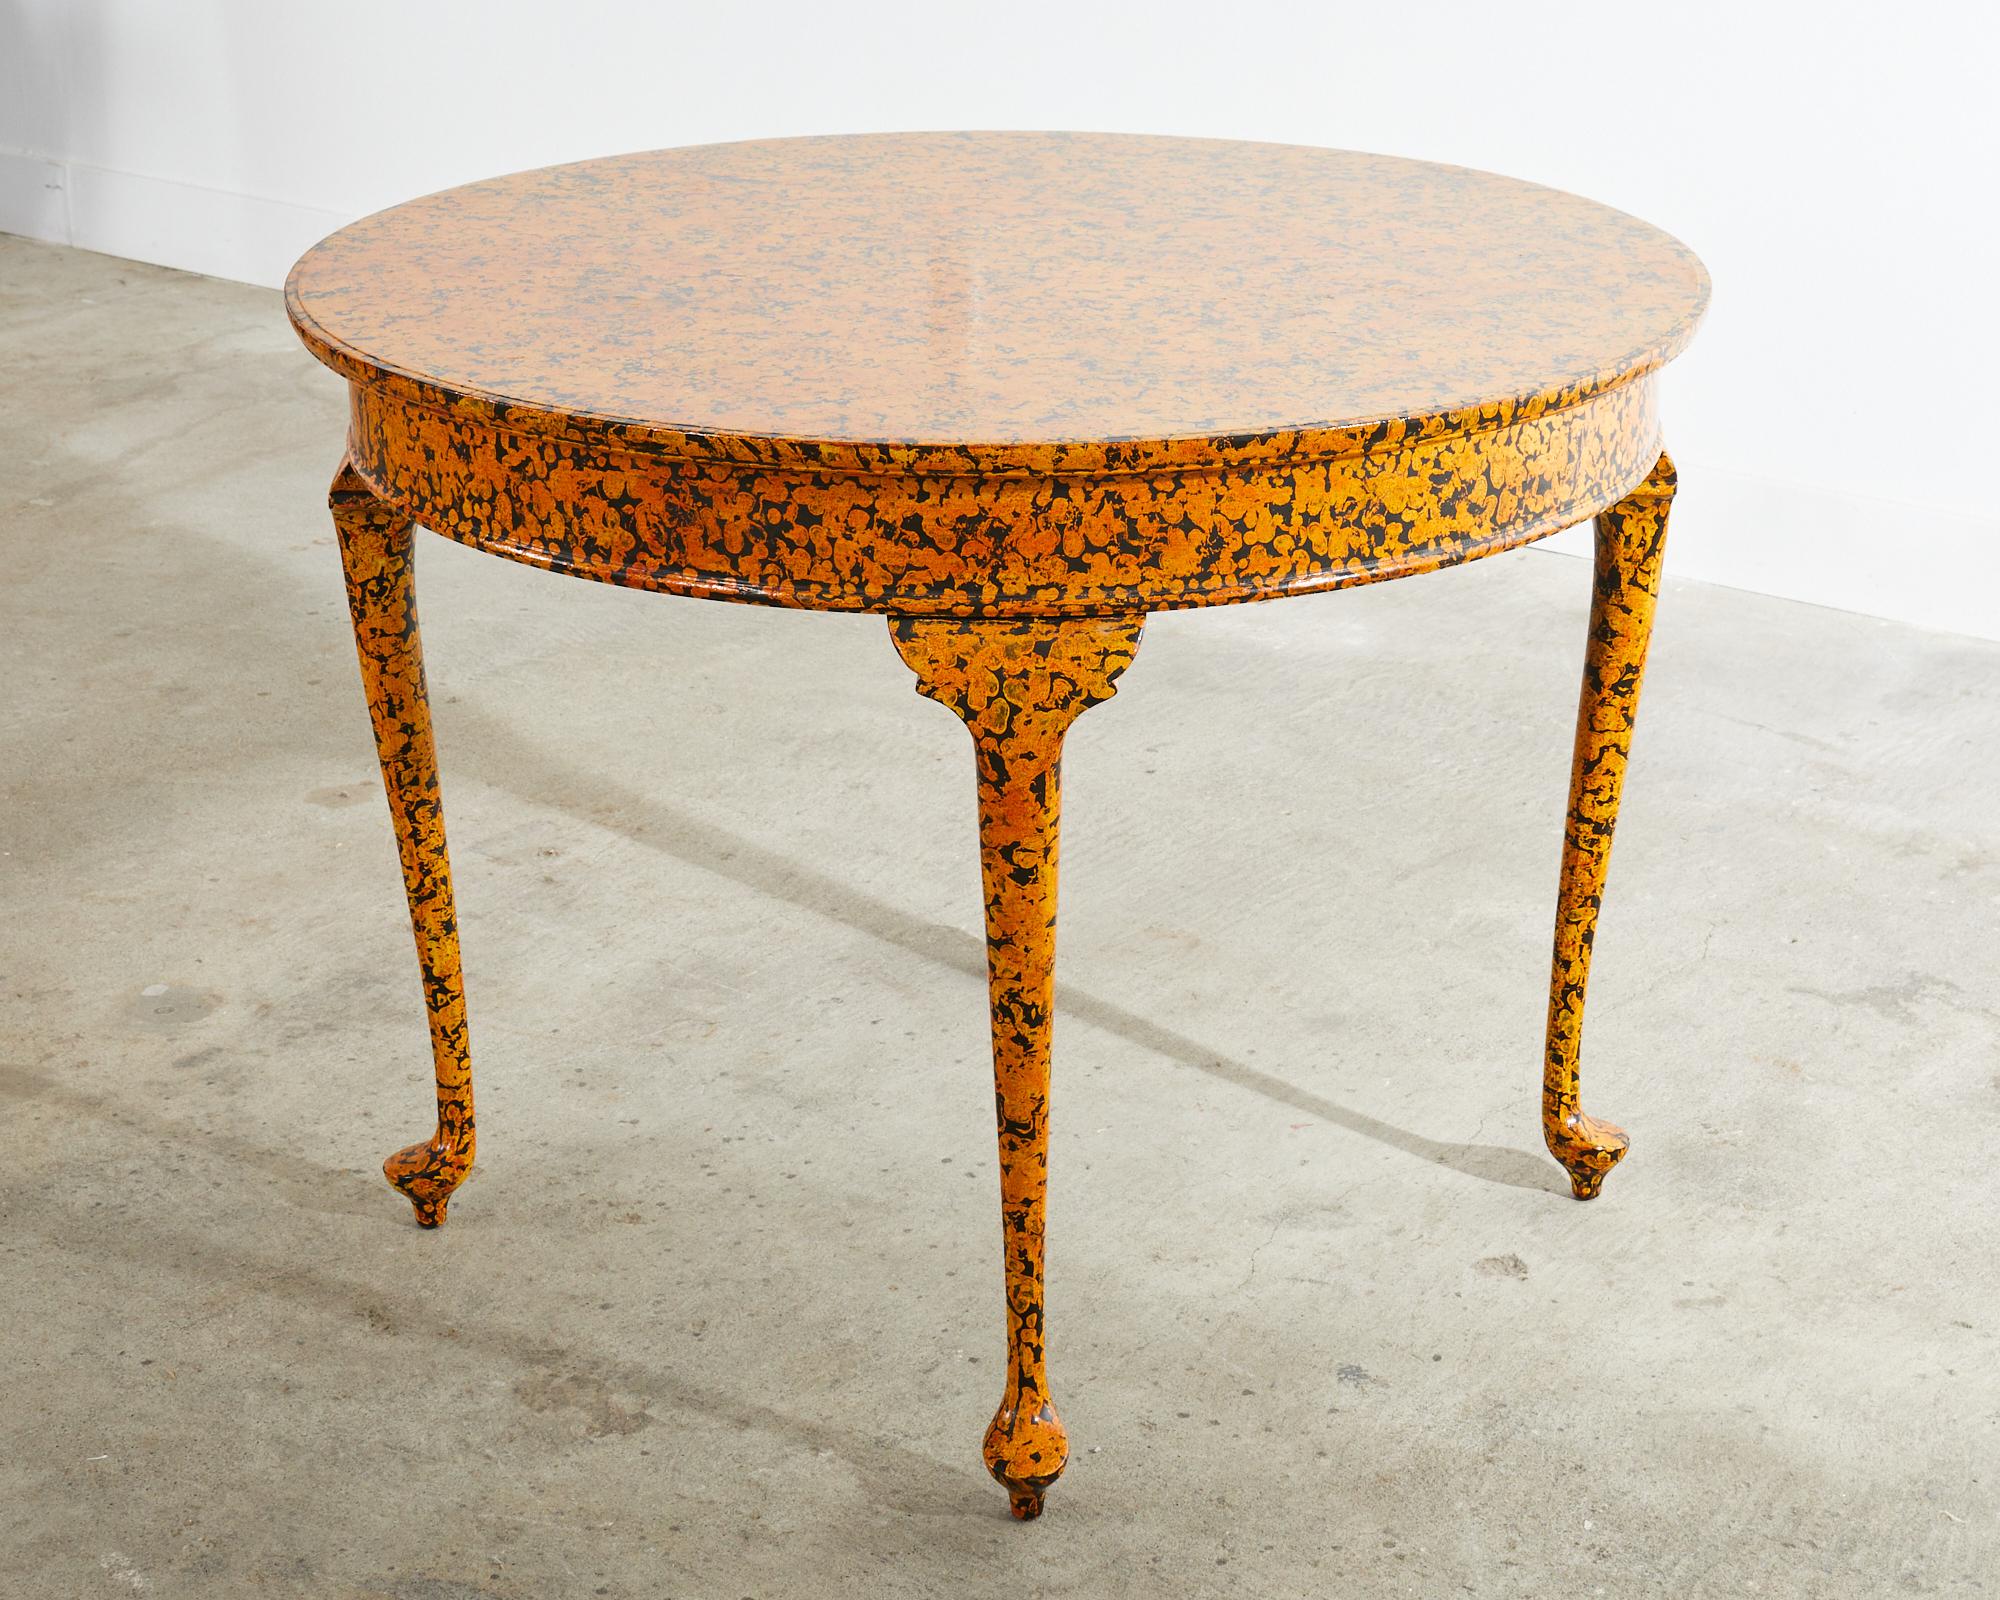 Queen Anne Style Round Dining Table Speckled by Ira Yeager 9